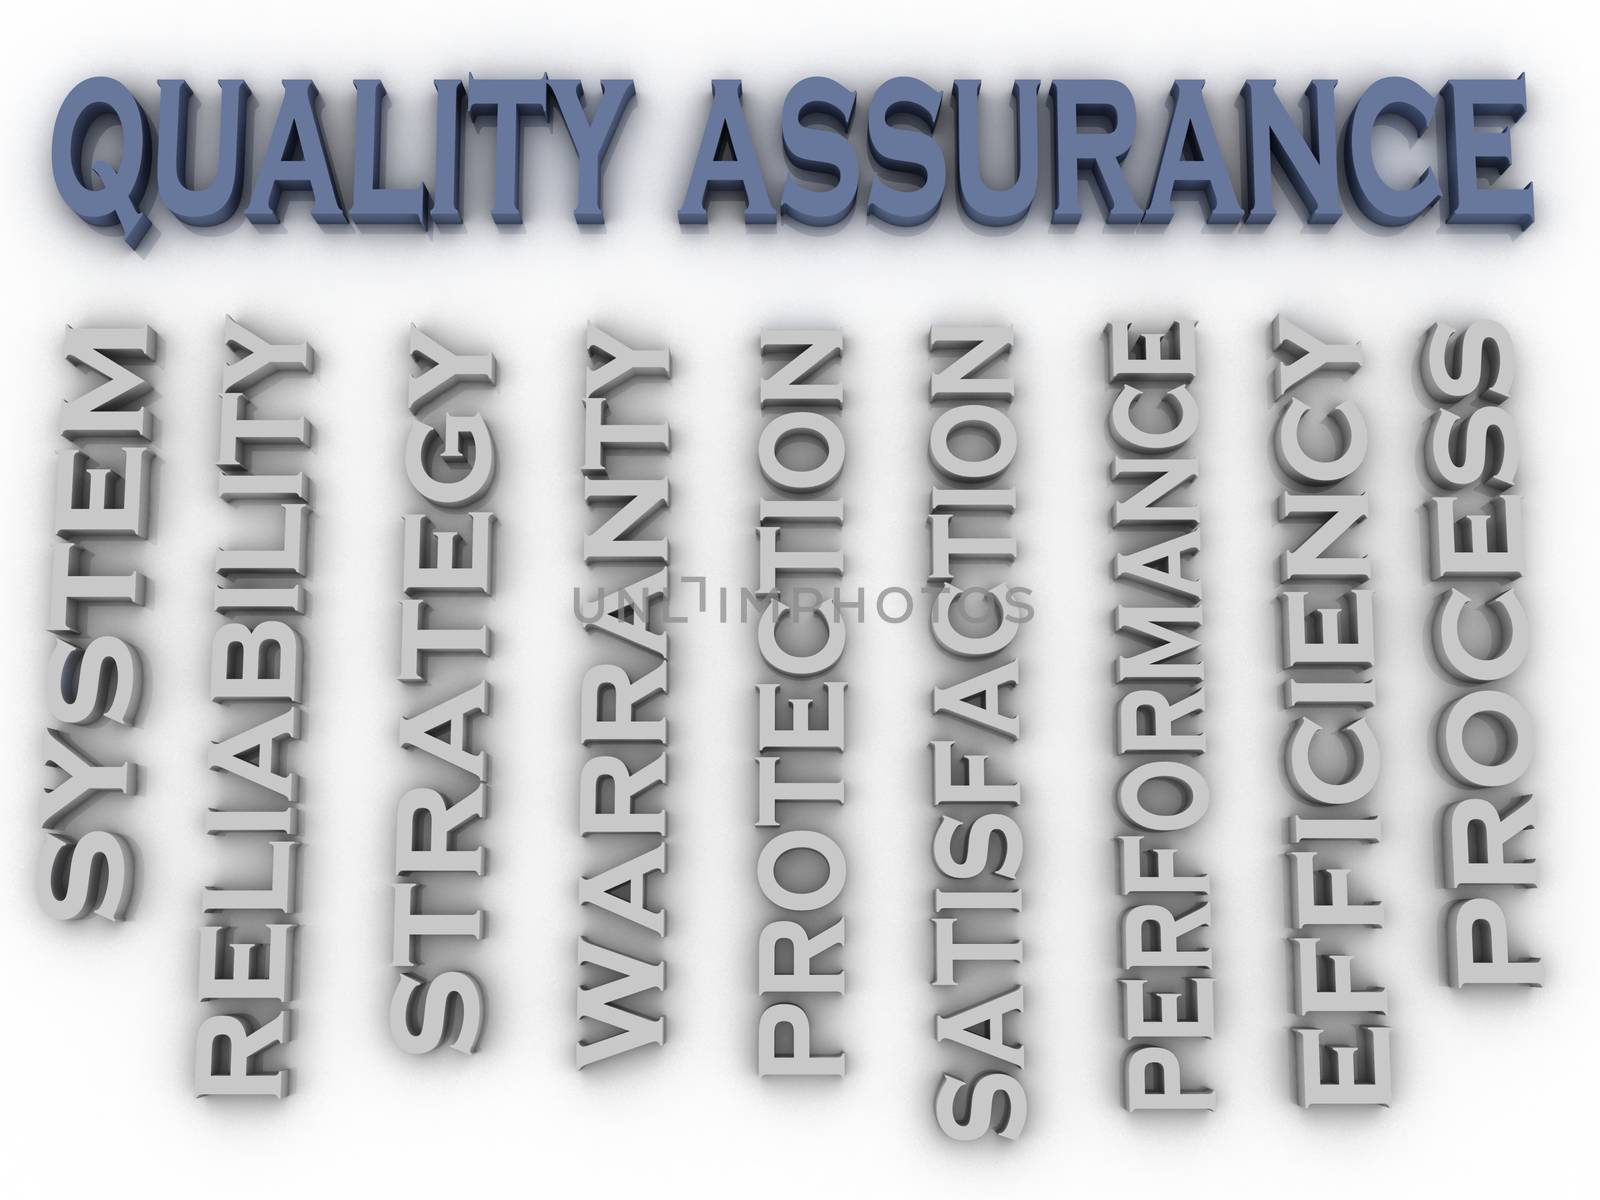 3d image Quality Assurance issues concept word cloud background